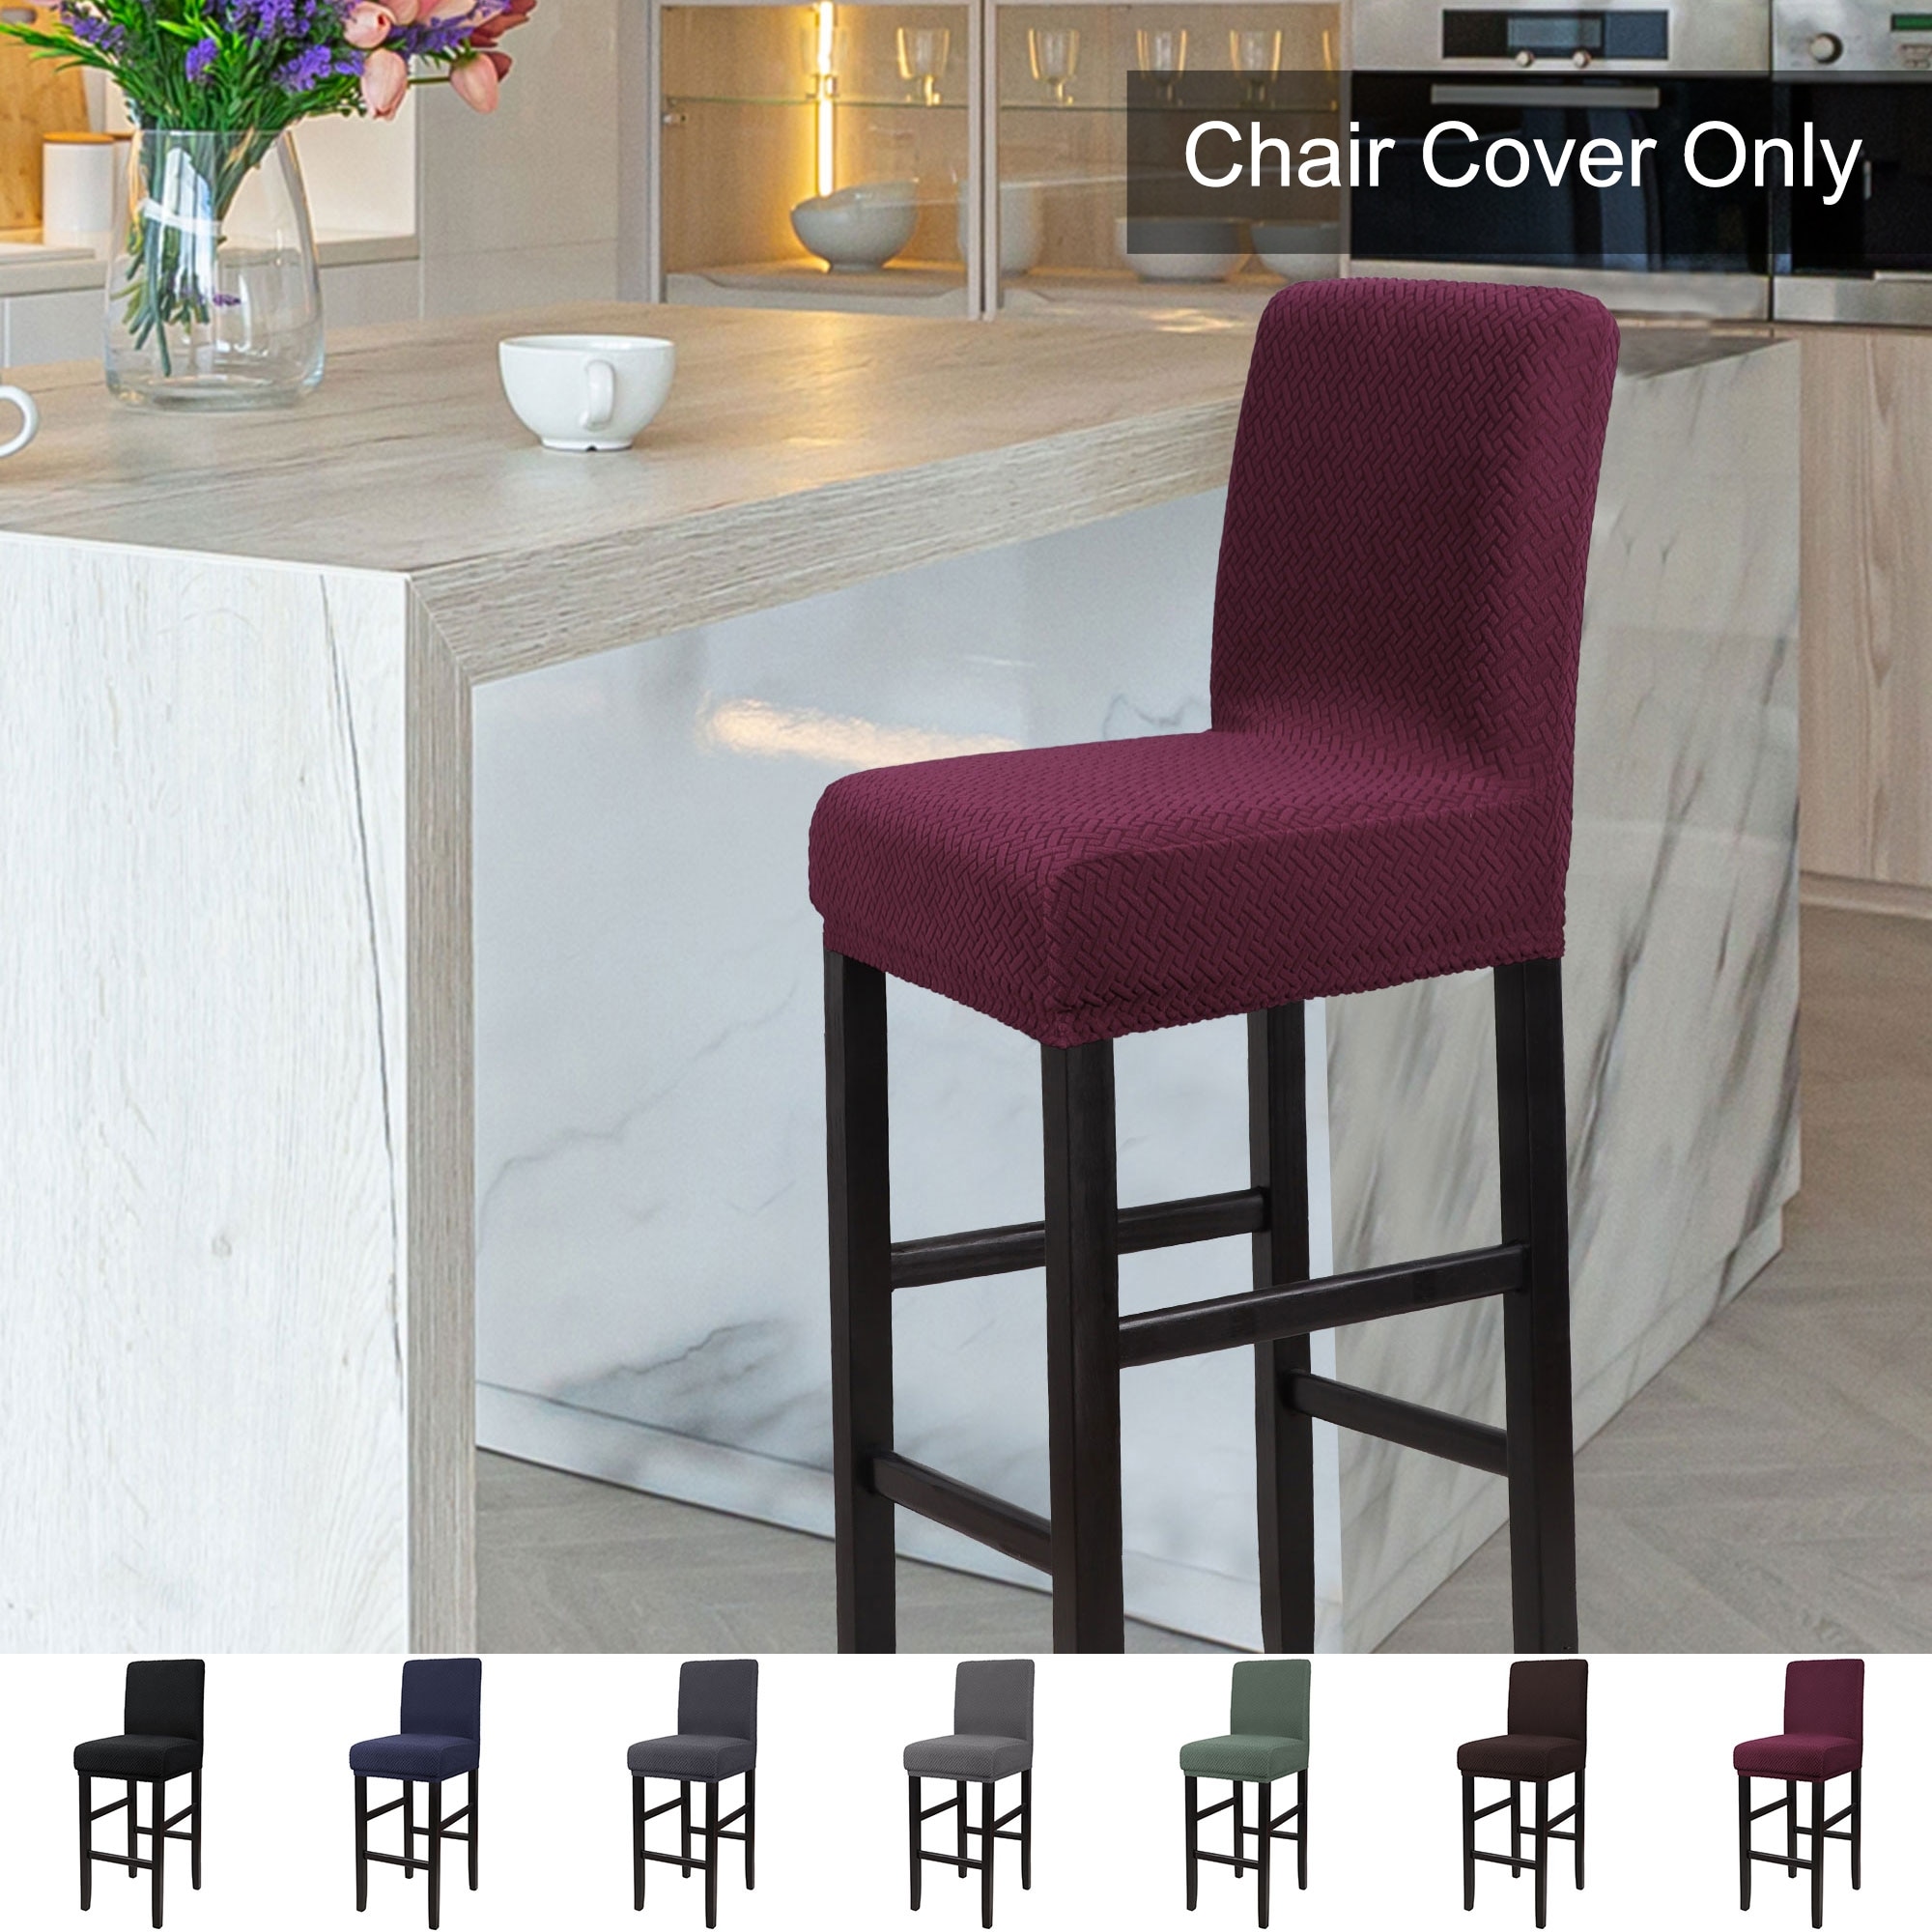 Stretchy Spandex Chair Cover Slipcover Modern Stool Cover Kitchen Home Decor New 